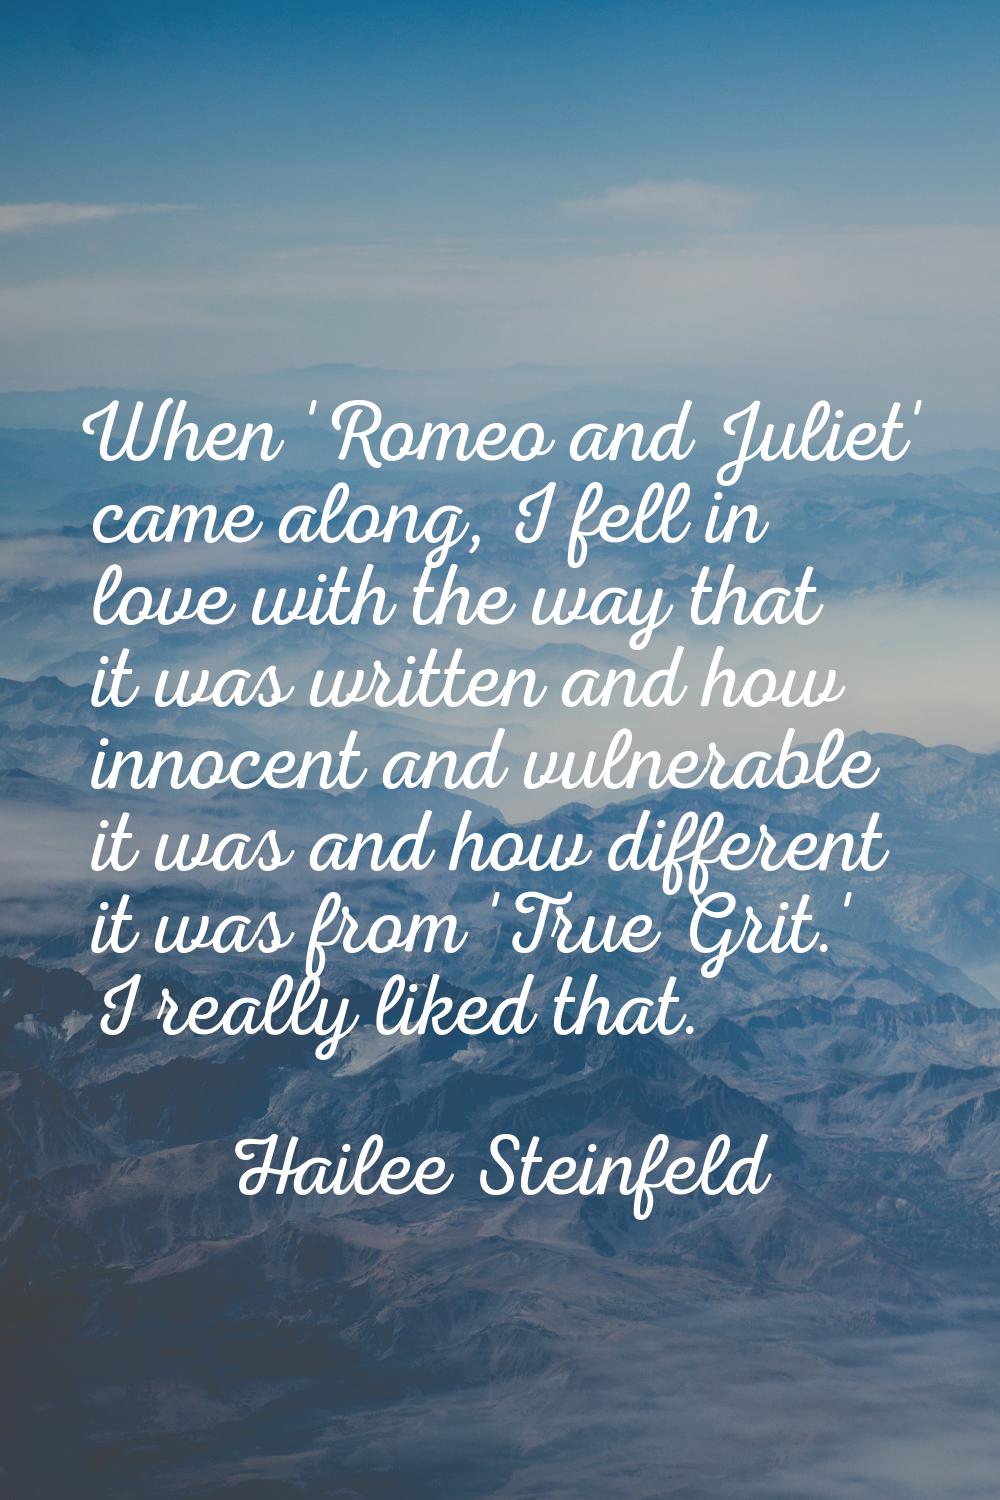 When 'Romeo and Juliet' came along, I fell in love with the way that it was written and how innocen